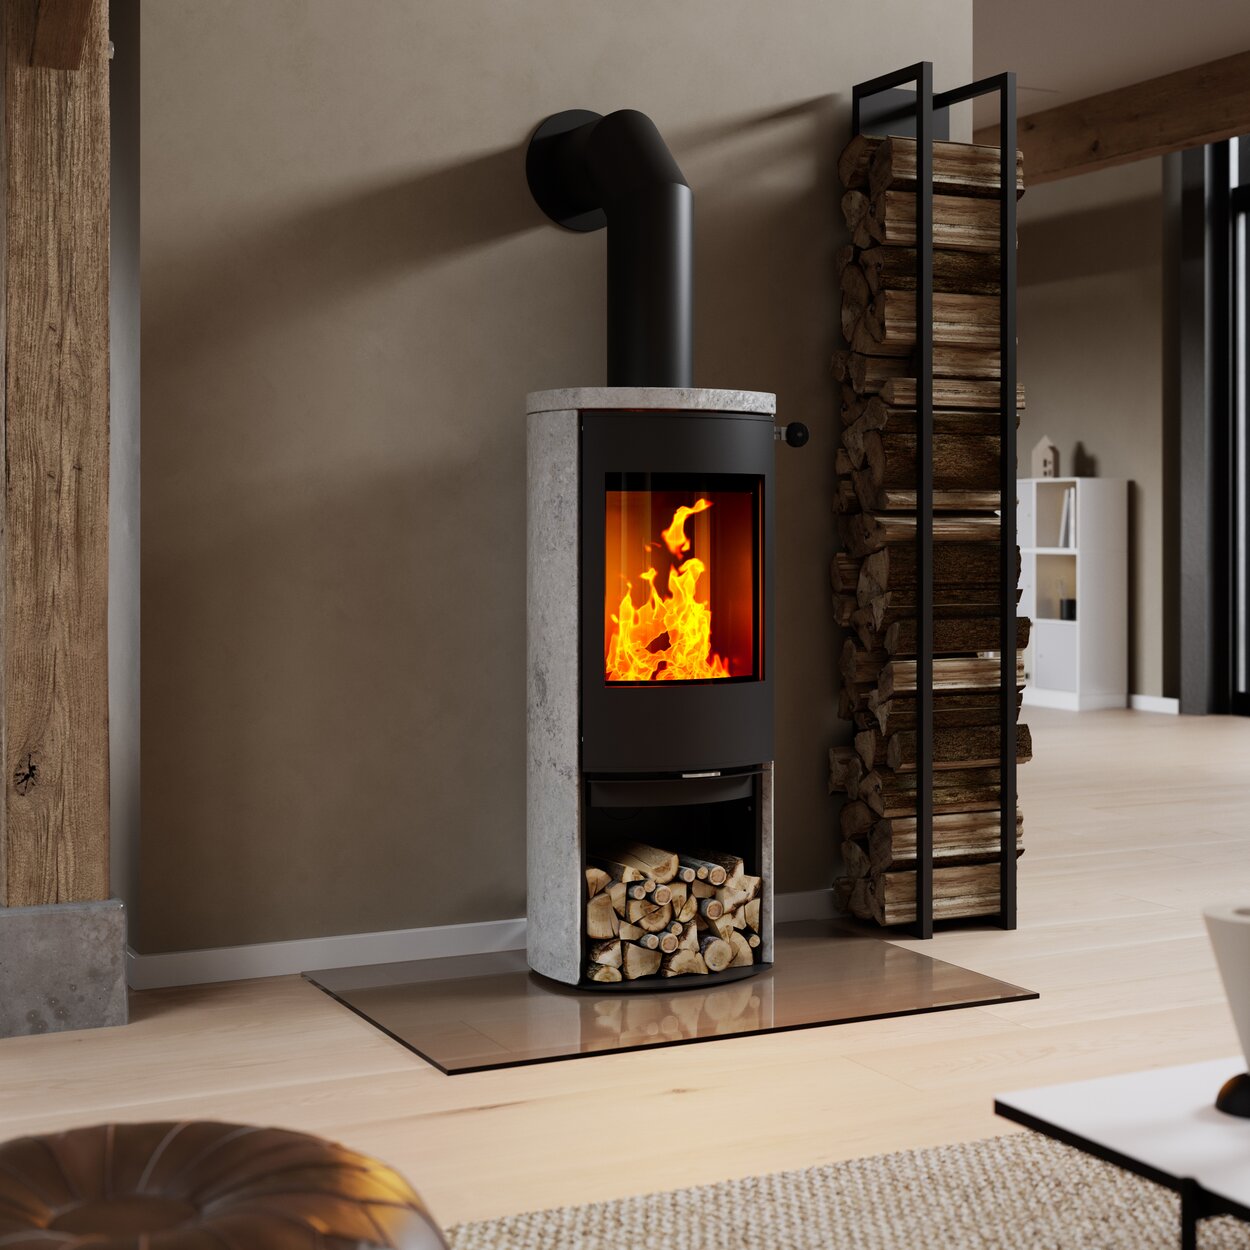 Wood stove CARO 120 with steel door in black and soapstone cladding